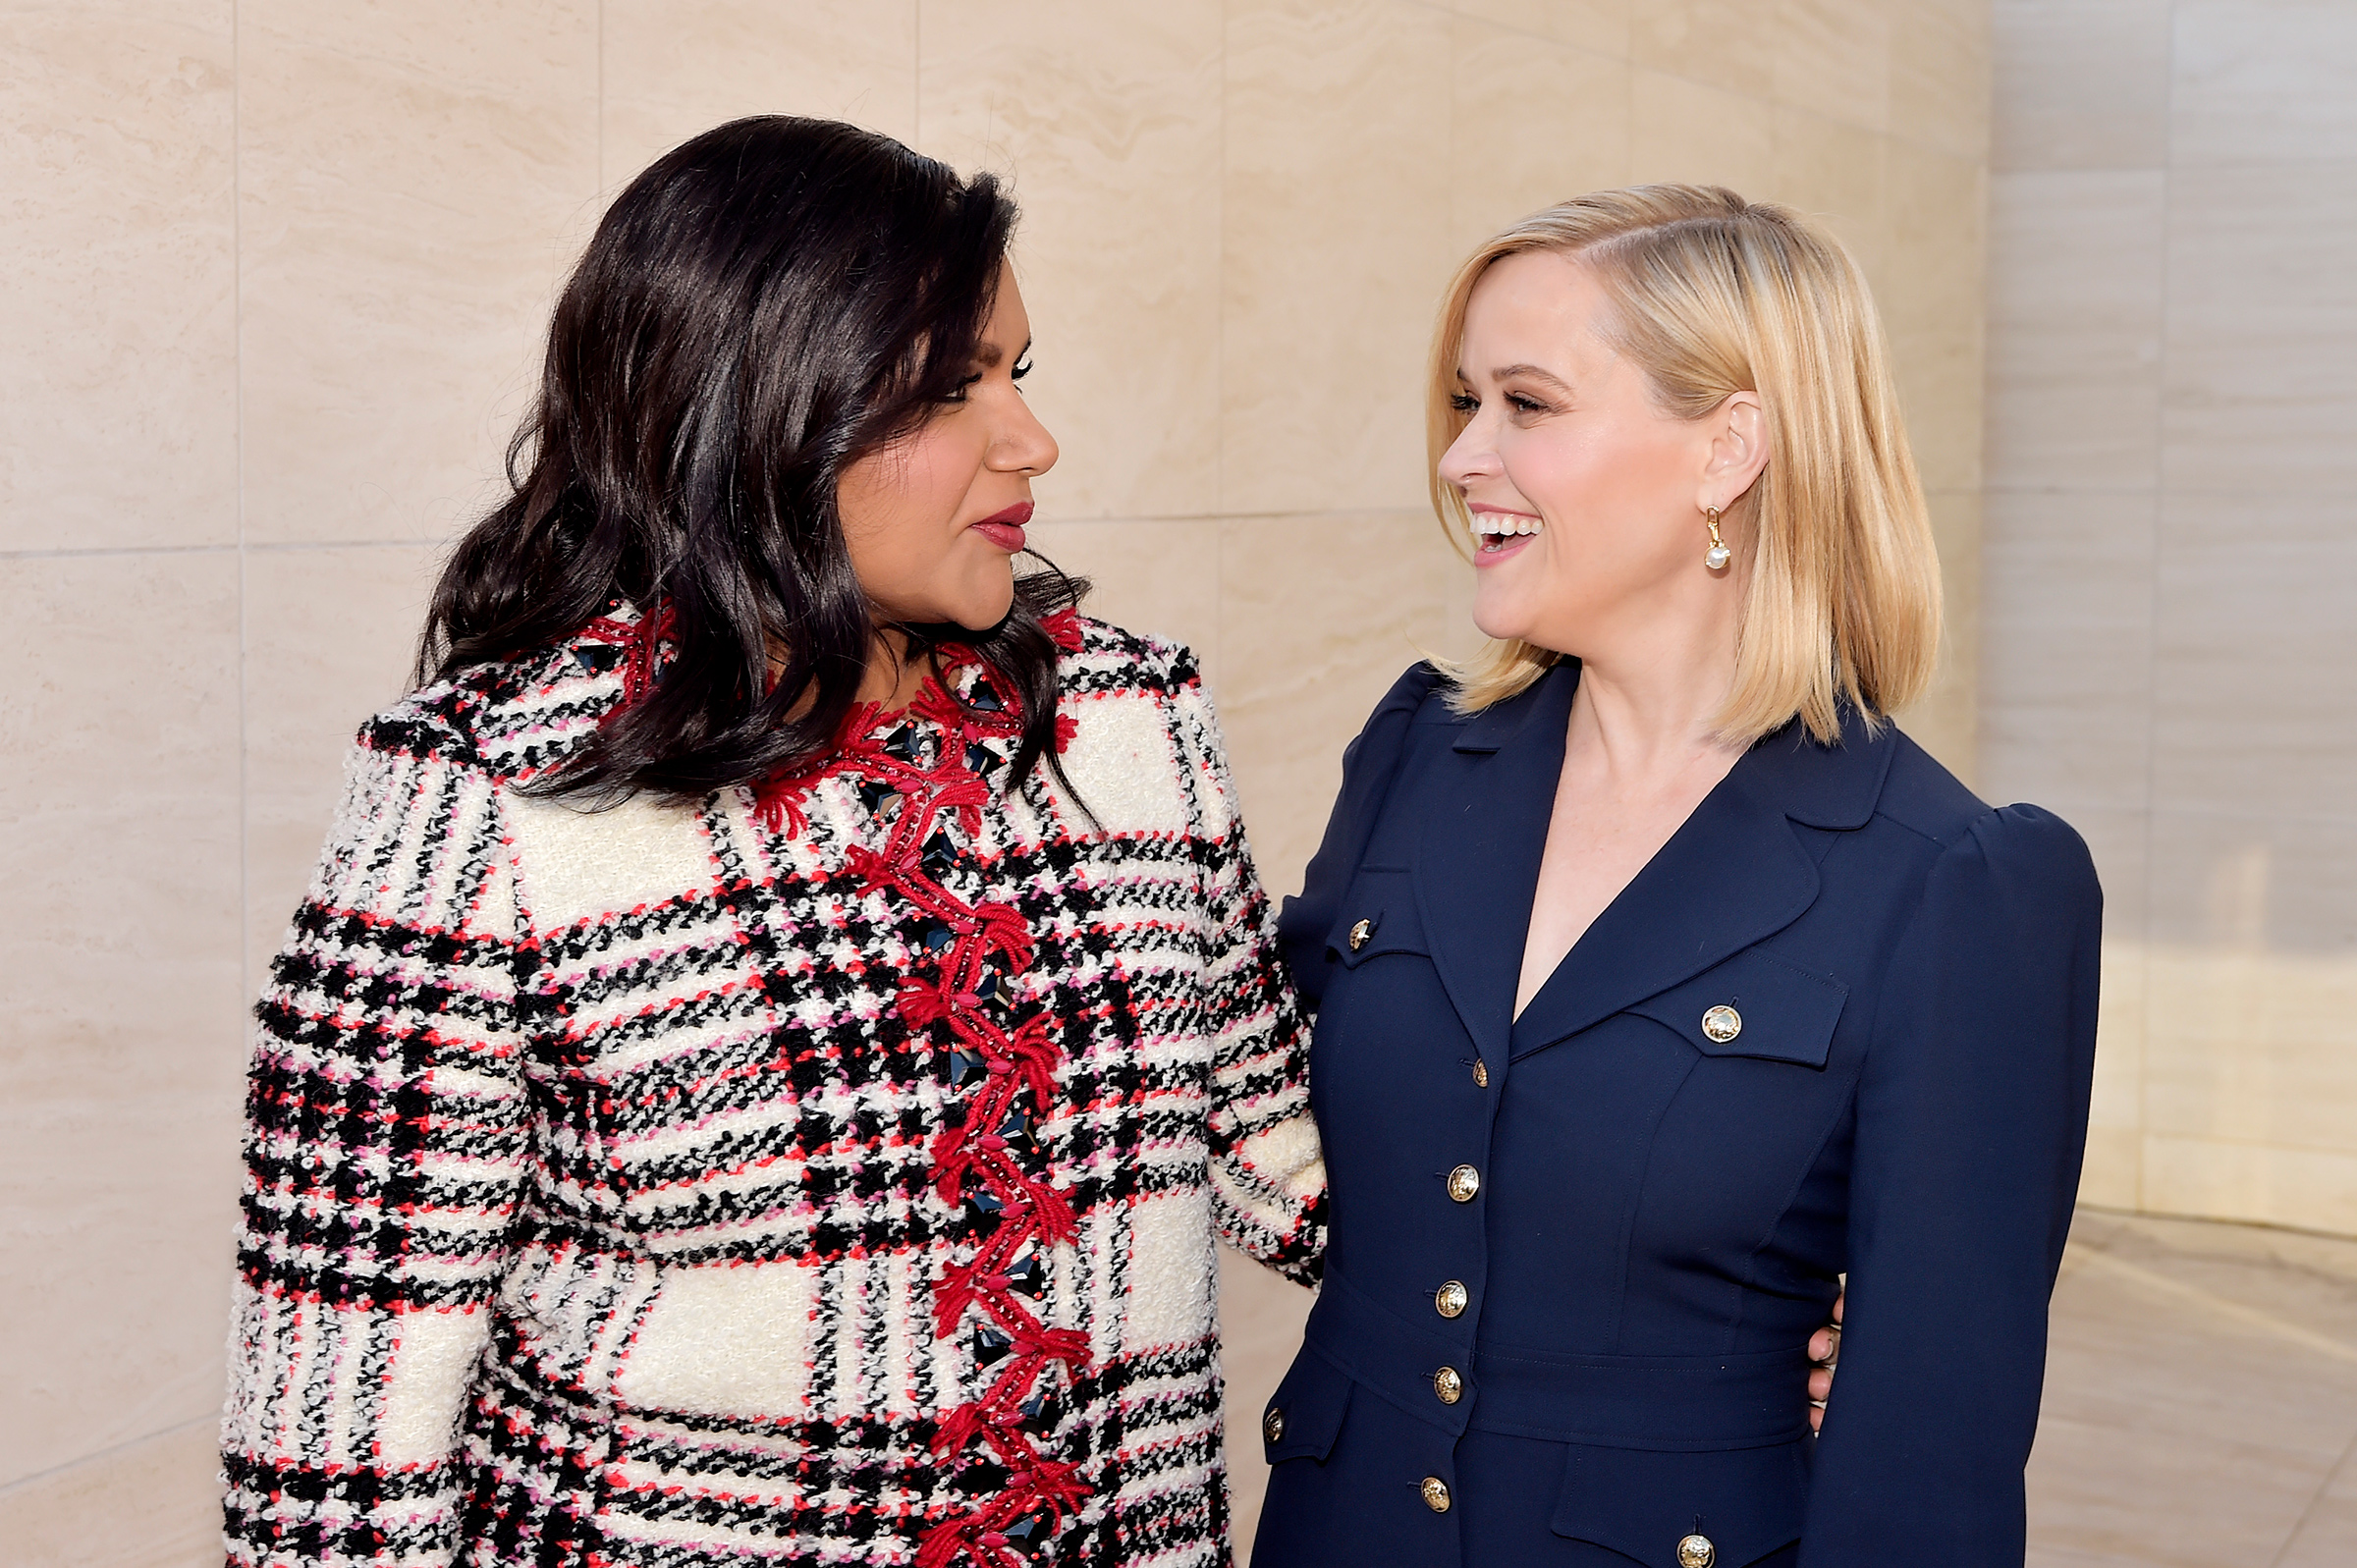 Mindy Kaling and Reese Witherspoon attend the Hollywood Reporter's Dec. 2019 Power 100 Women in Entertainment event in Los Angeles. (Stefanie Keenan—Getty Images for The Hollywood Reporter)